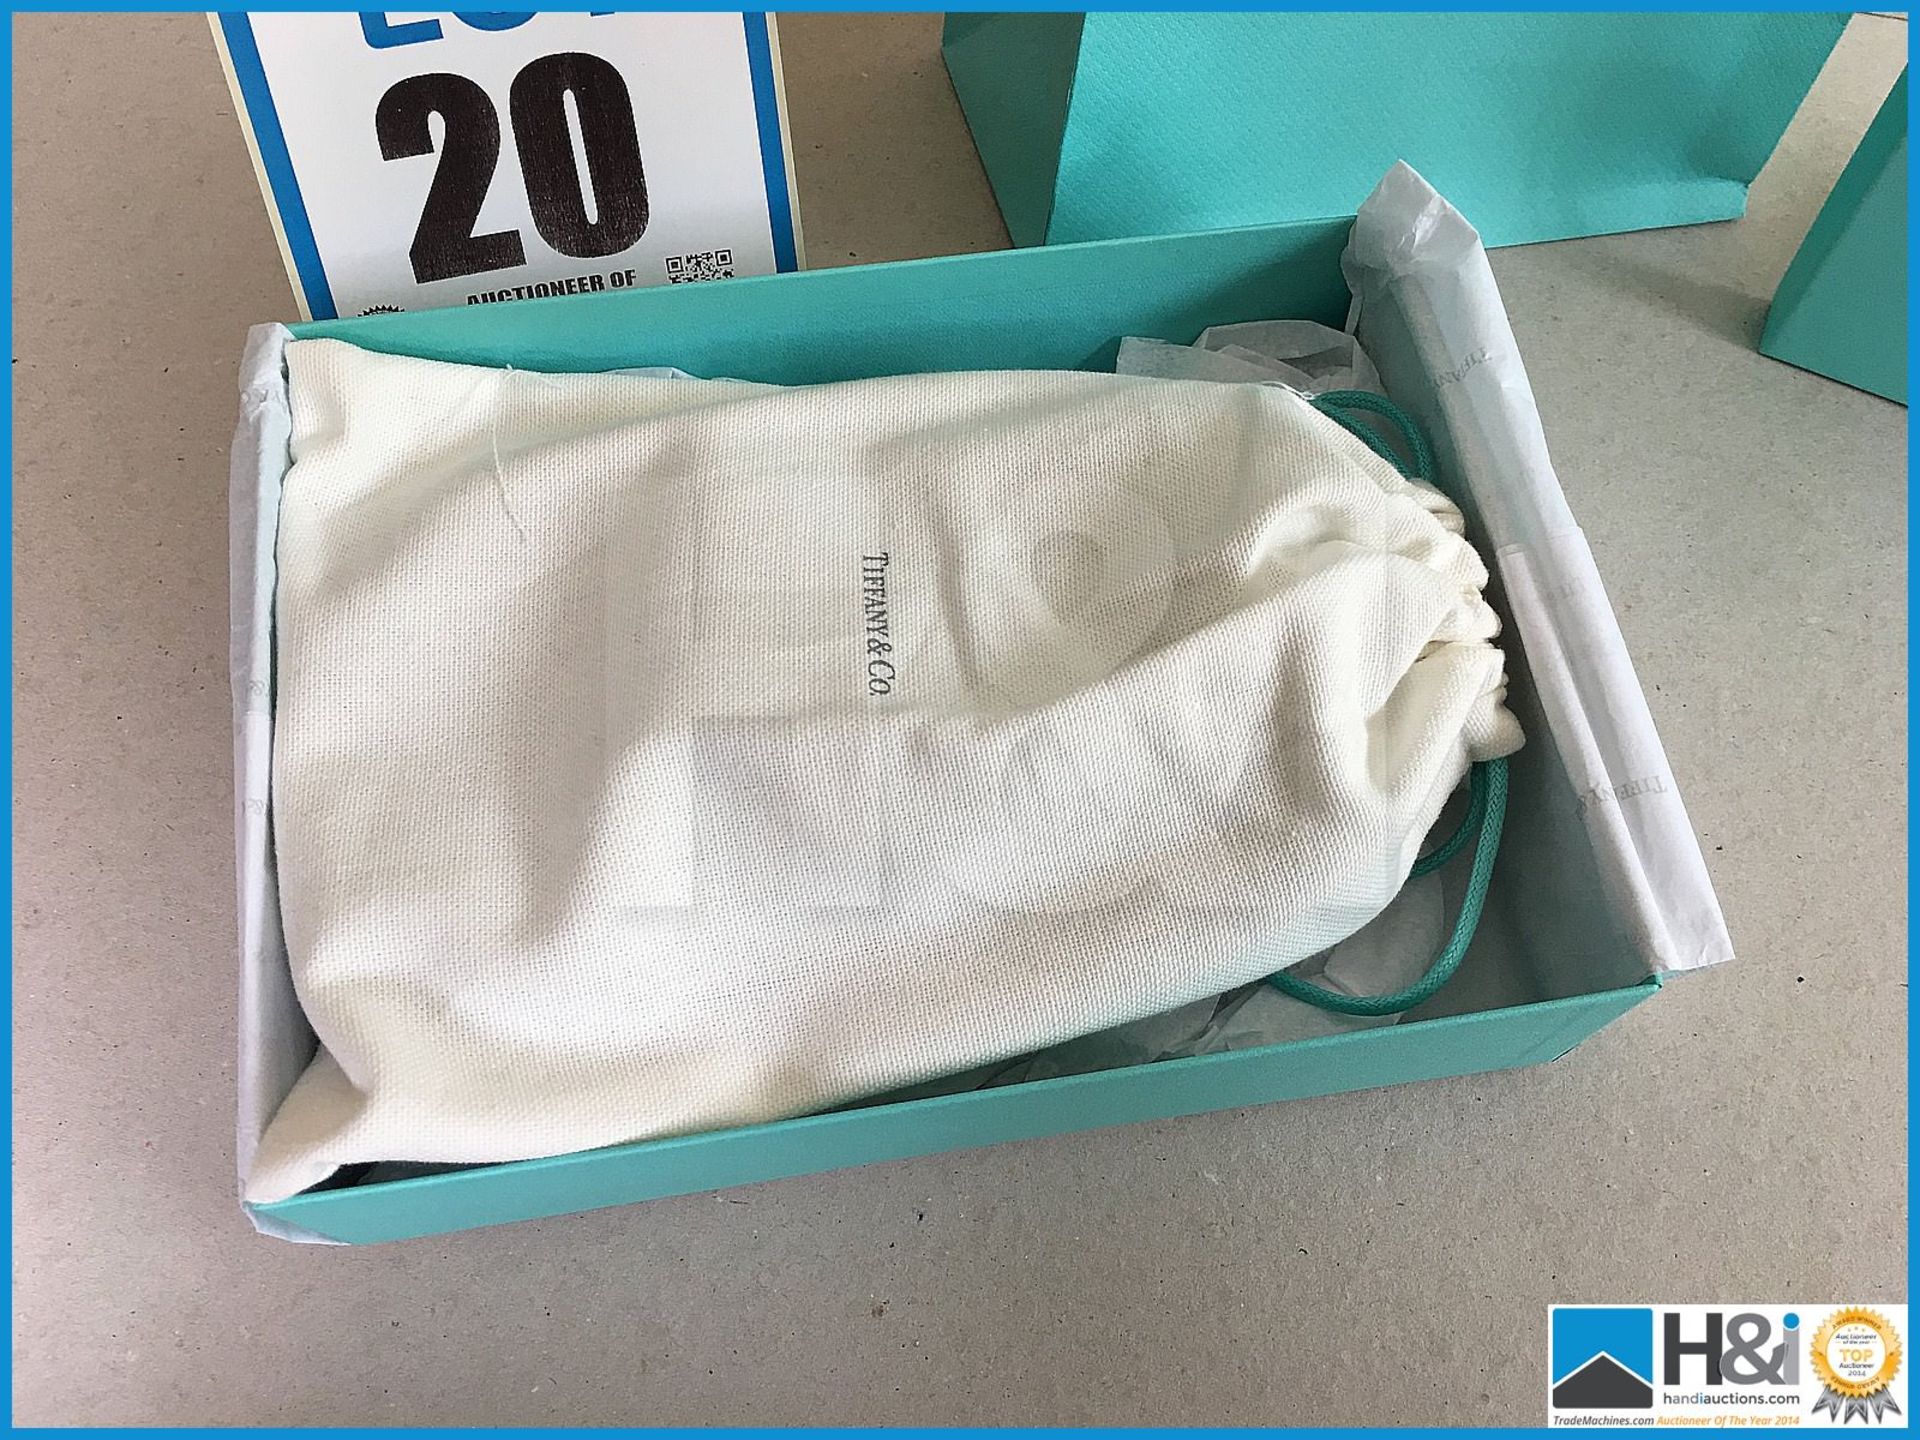 Genuine Tiffany & Co Purse / Wallet in Robins Egg Blue completely unused still with card protectors - Image 8 of 11